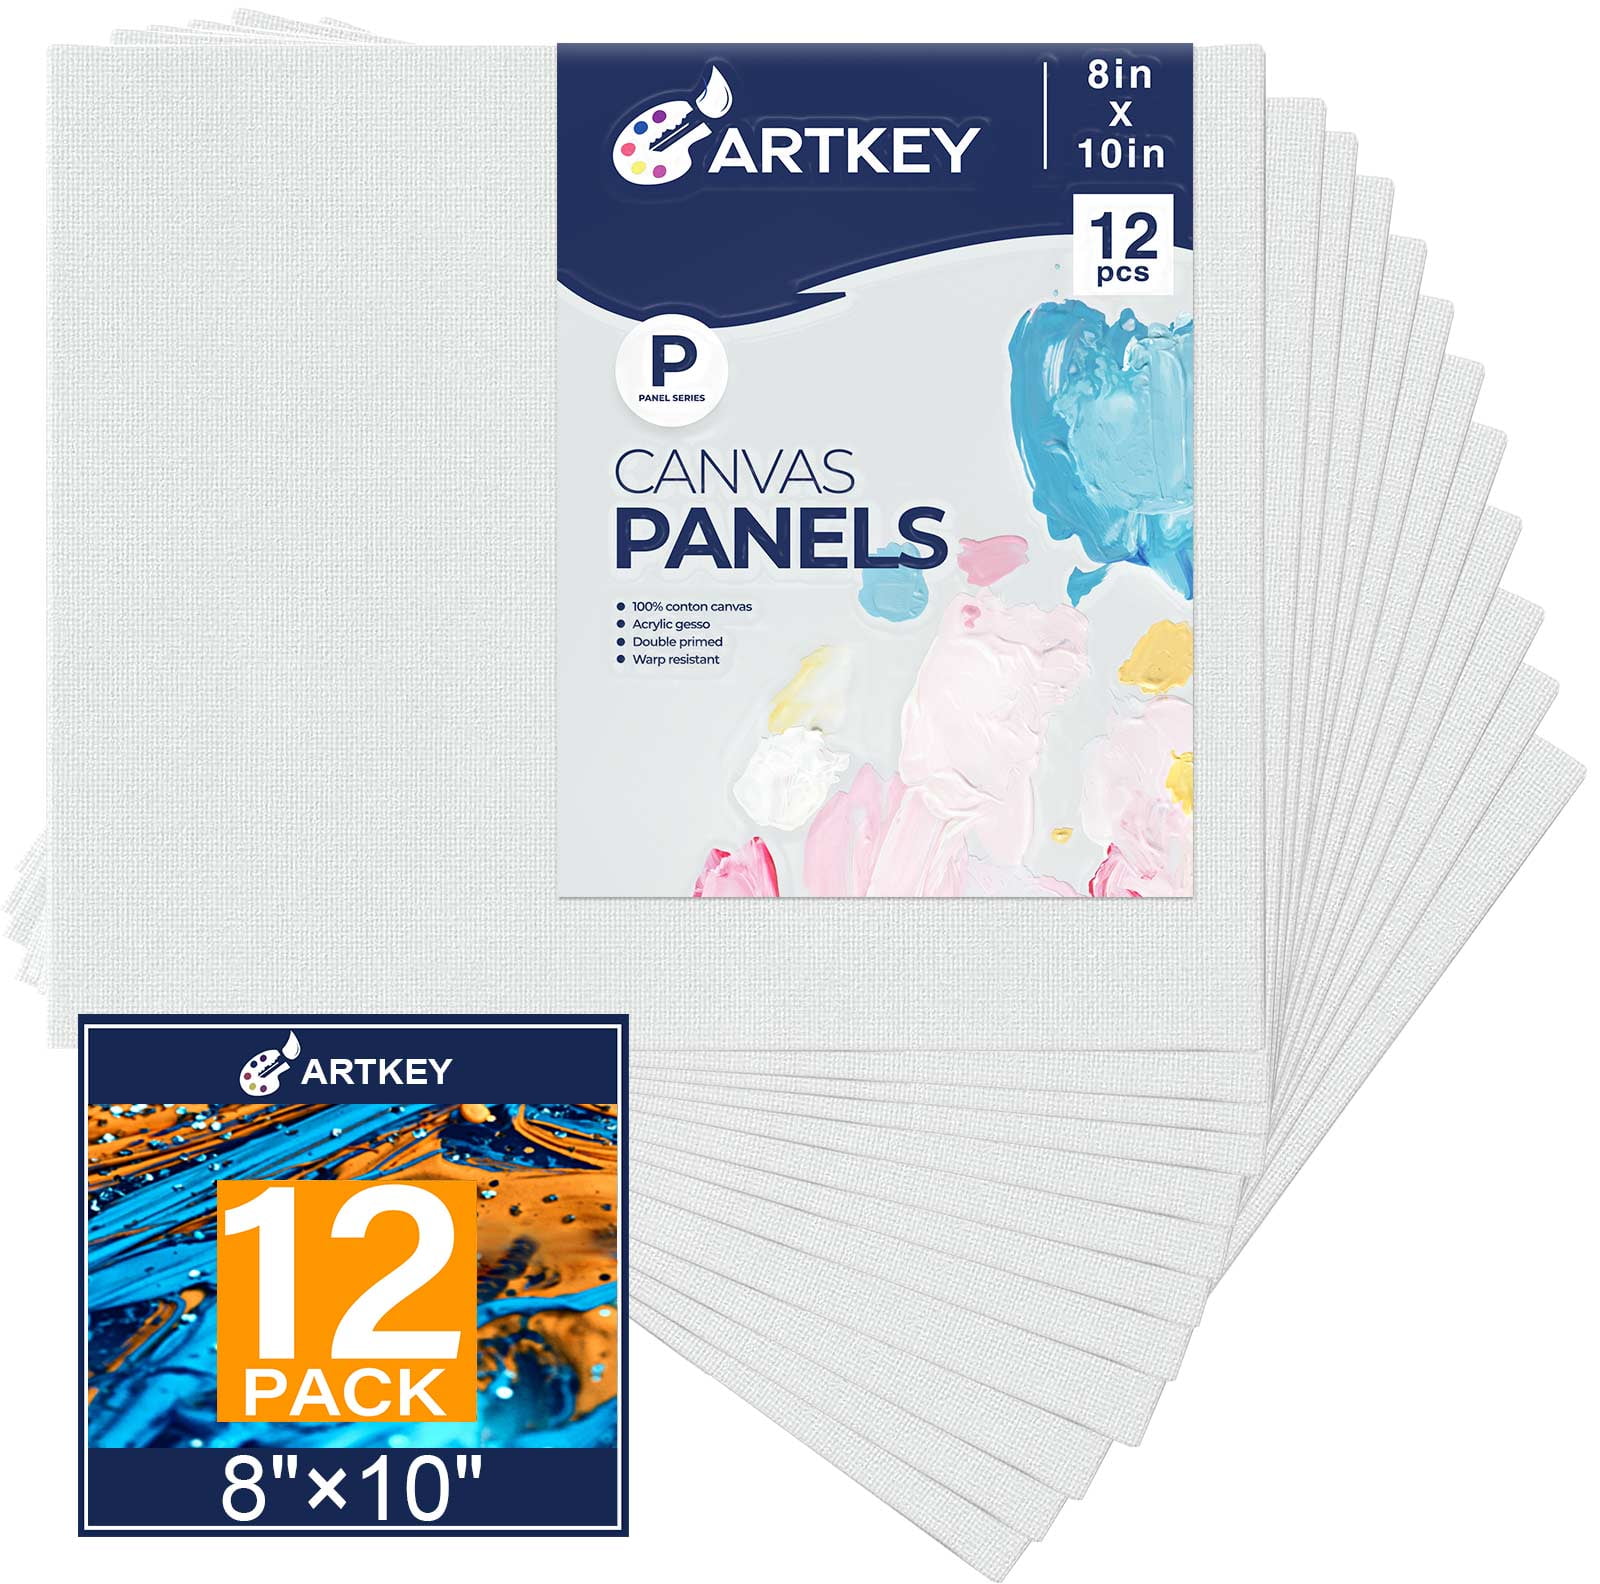 Artkey Canvas Panels 8x10 inch 12-Pack, Acid-Free 100% Cotton for Painting  for Adult